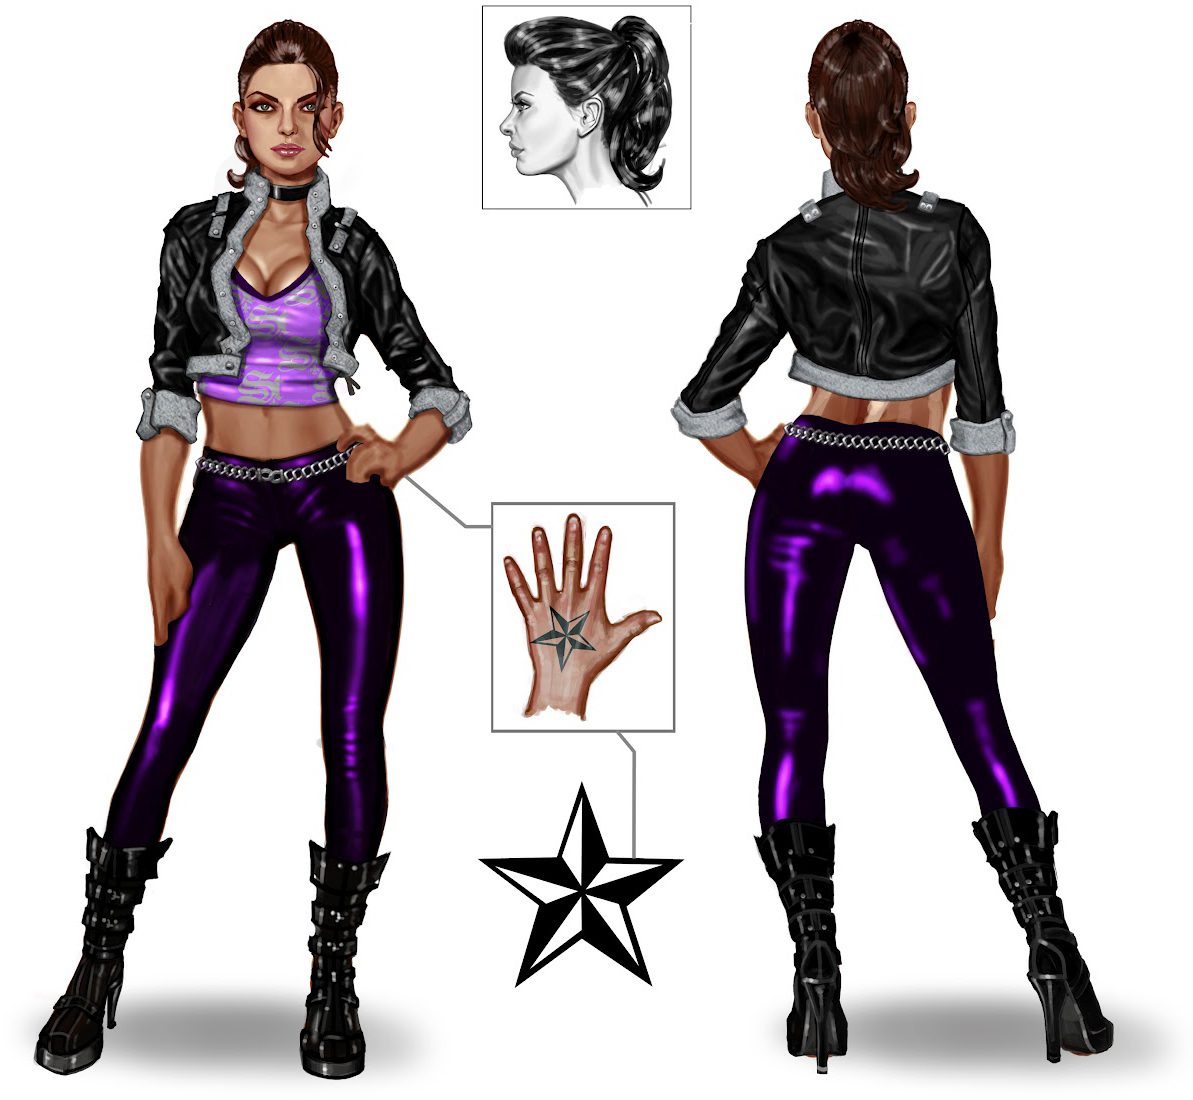 saints row 2 better looking female characters